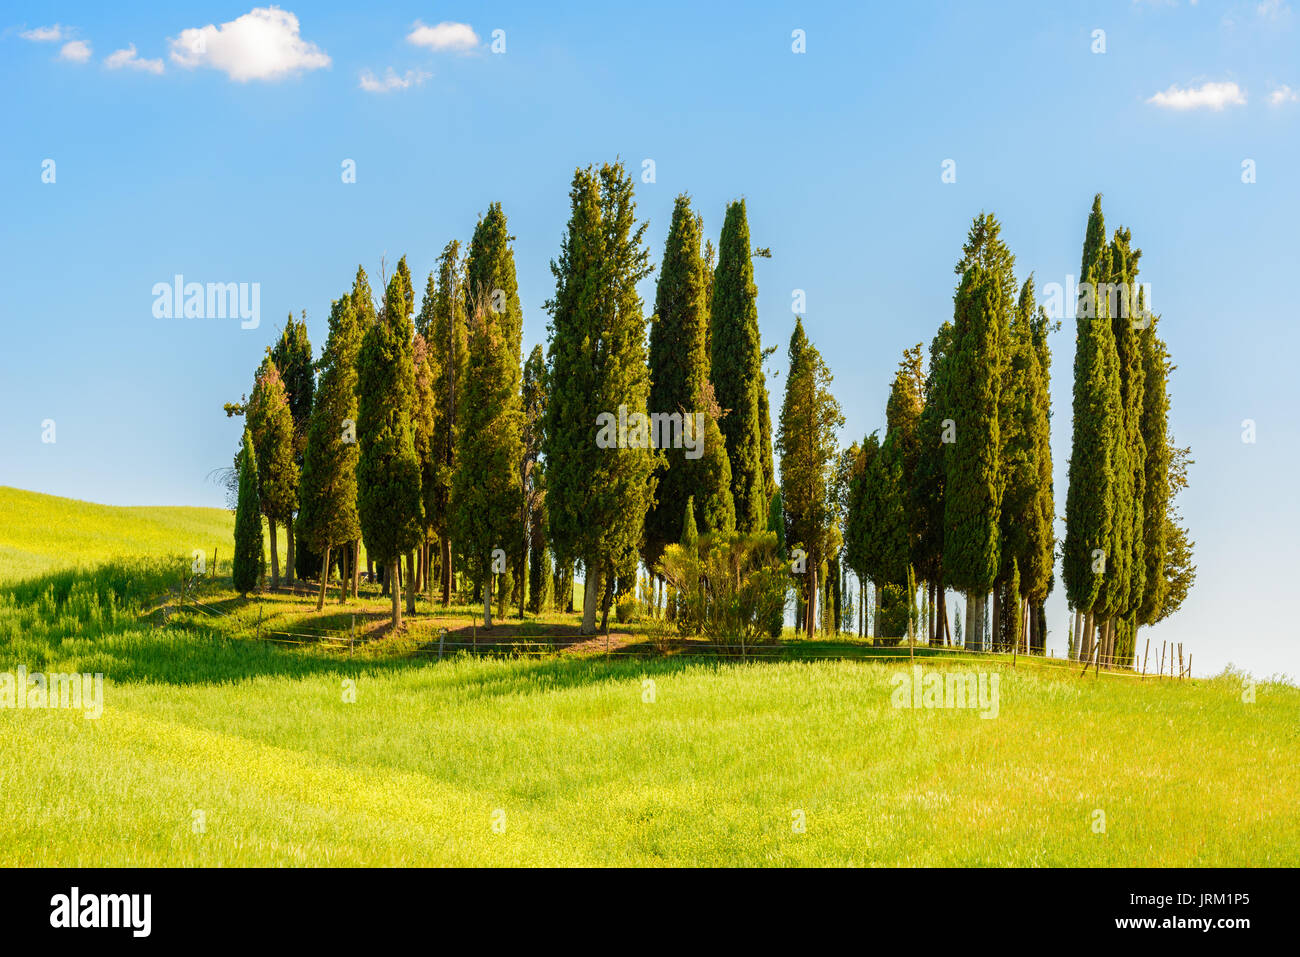 PIENZA, ITALY - MAY 21, 2017 - Cypress trees in a middle of a green field in the Natural Area of Val d'Orcia in Tuscany. Stock Photo